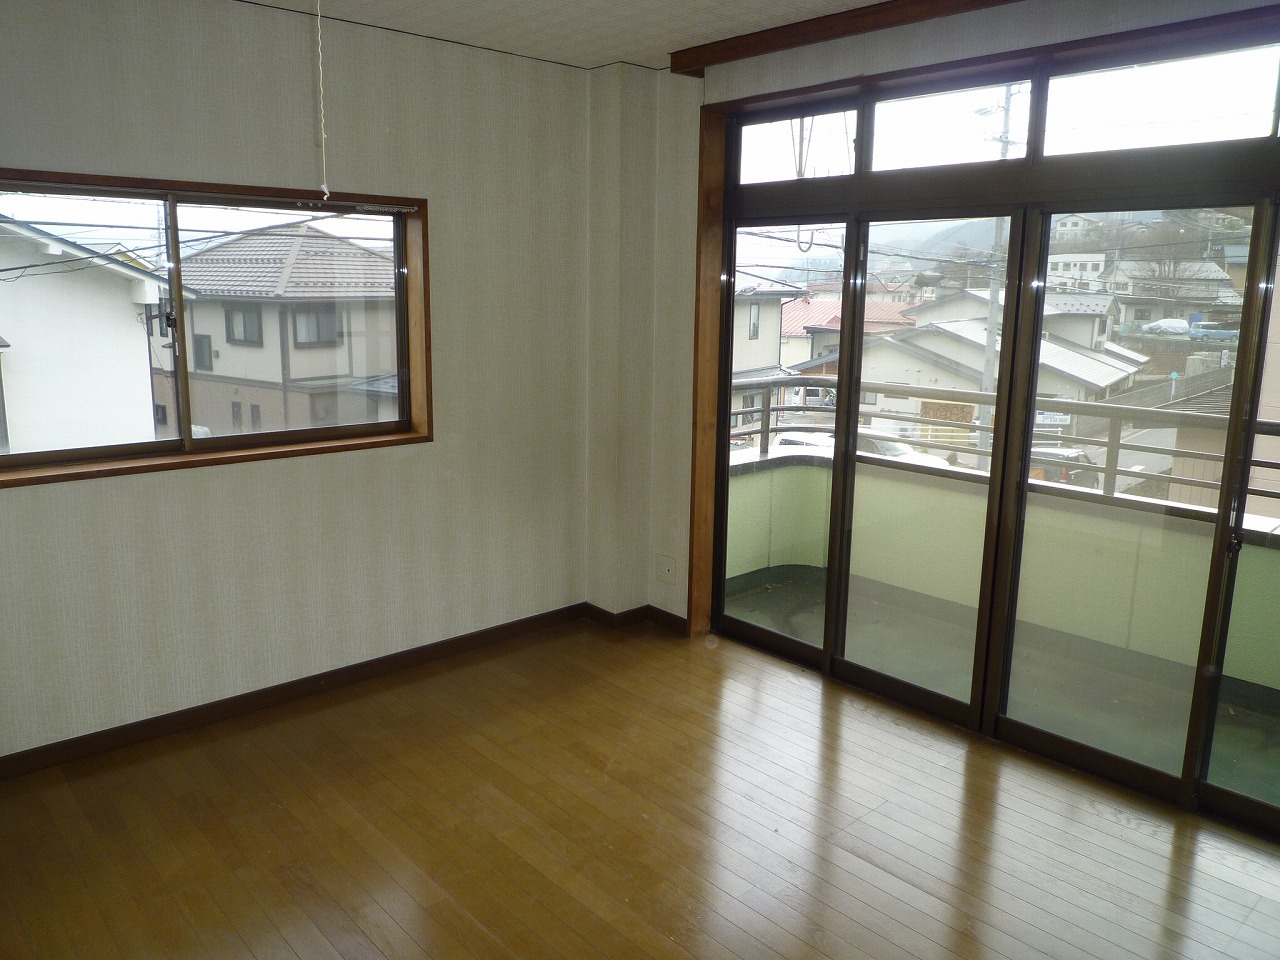 Living and room. Reversal type of corner room (there is no side window)